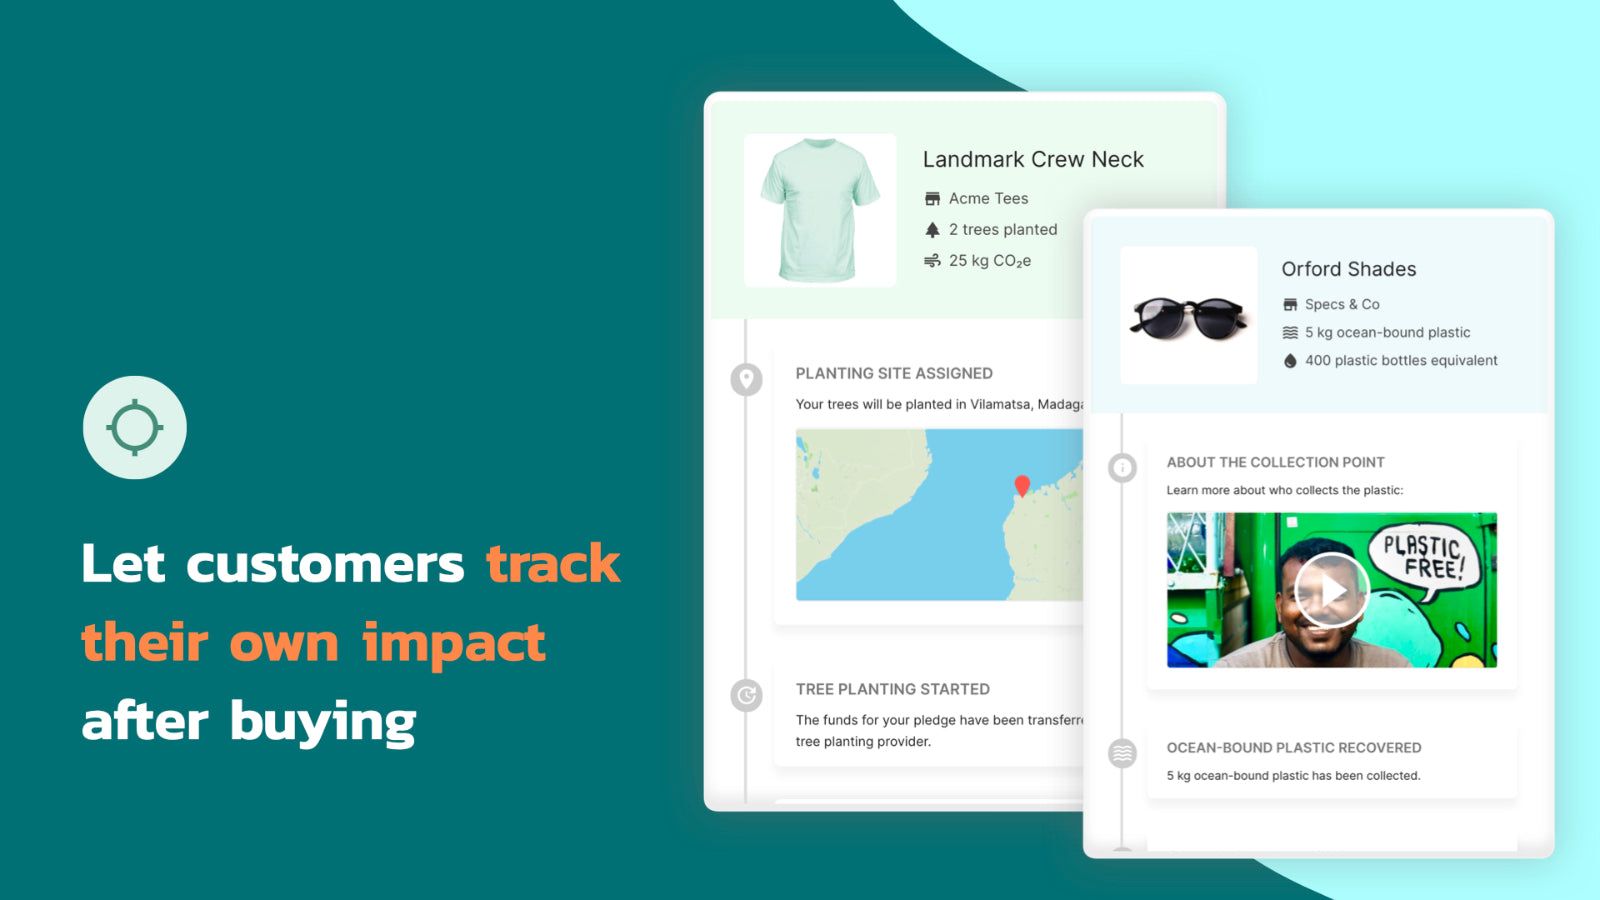 Let customers track their own impact after buying